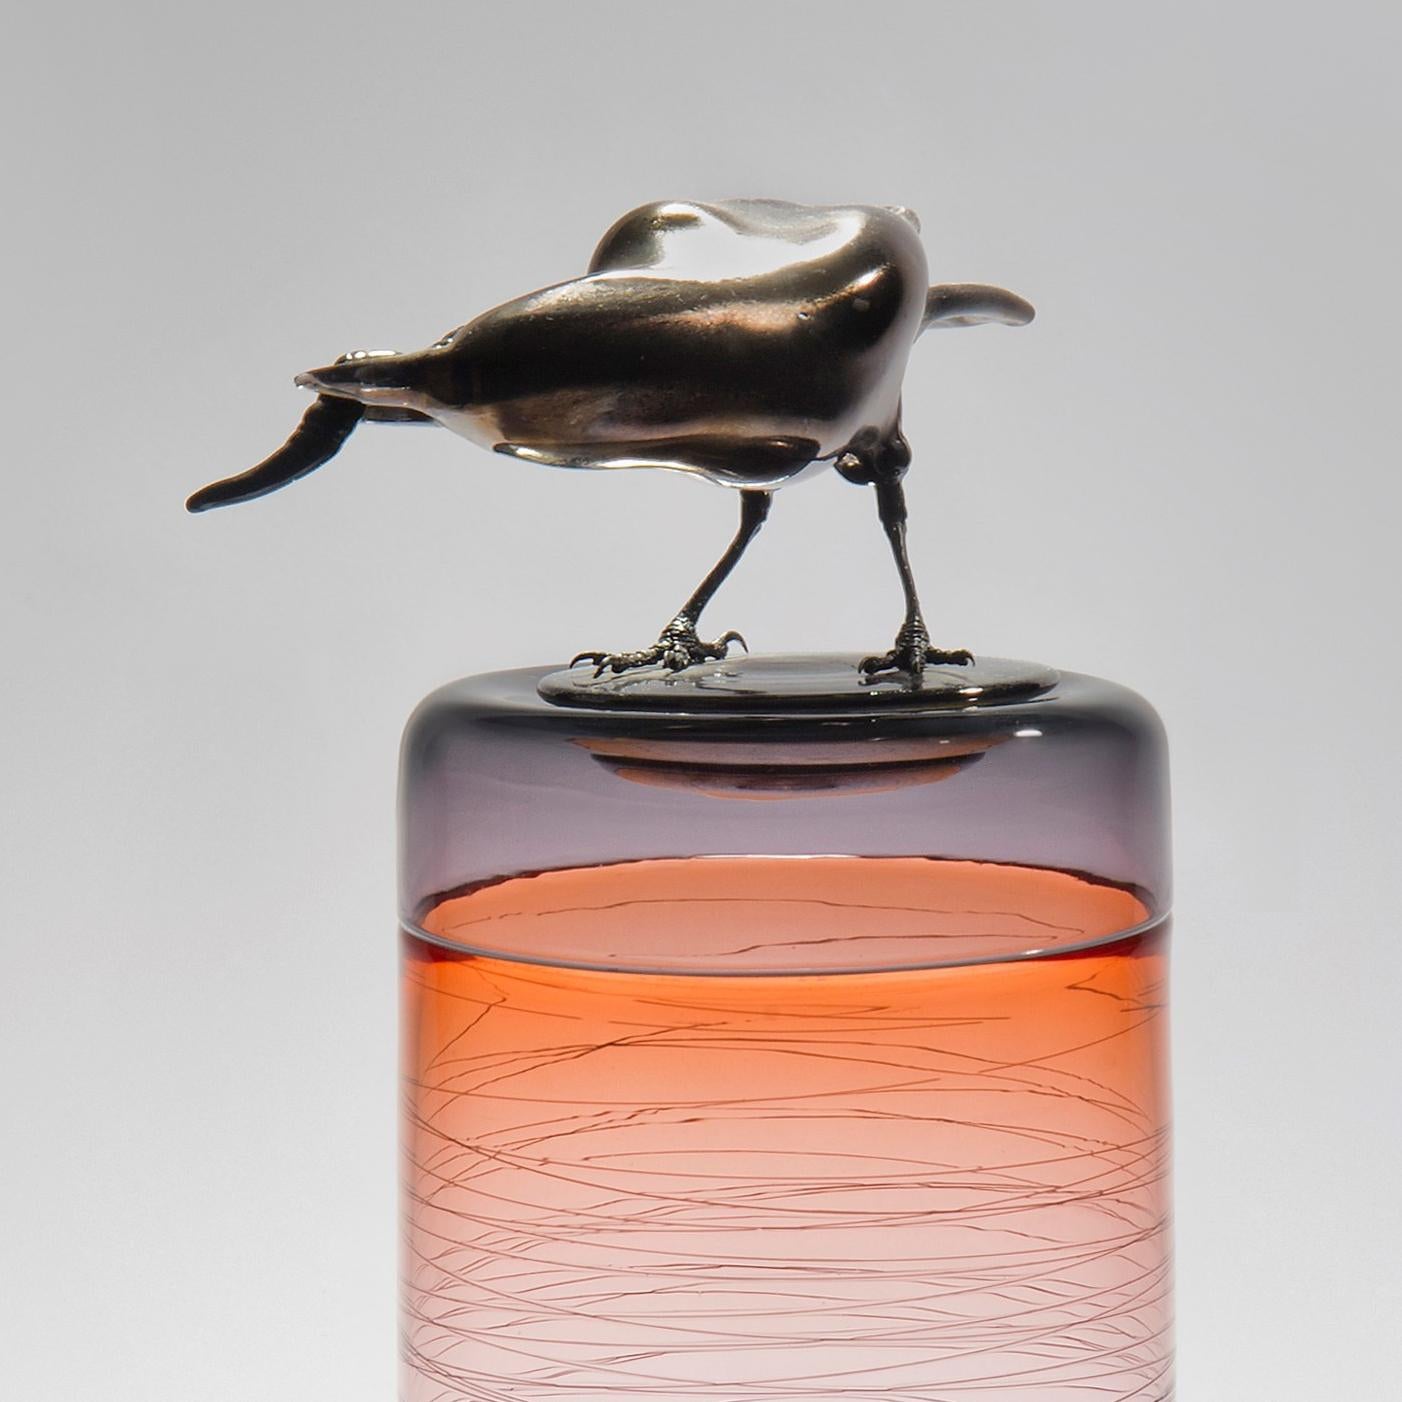 Organic Modern Gourmande, a Unique Glass Sculptural Vase with Black Crow by Julie Johnson For Sale